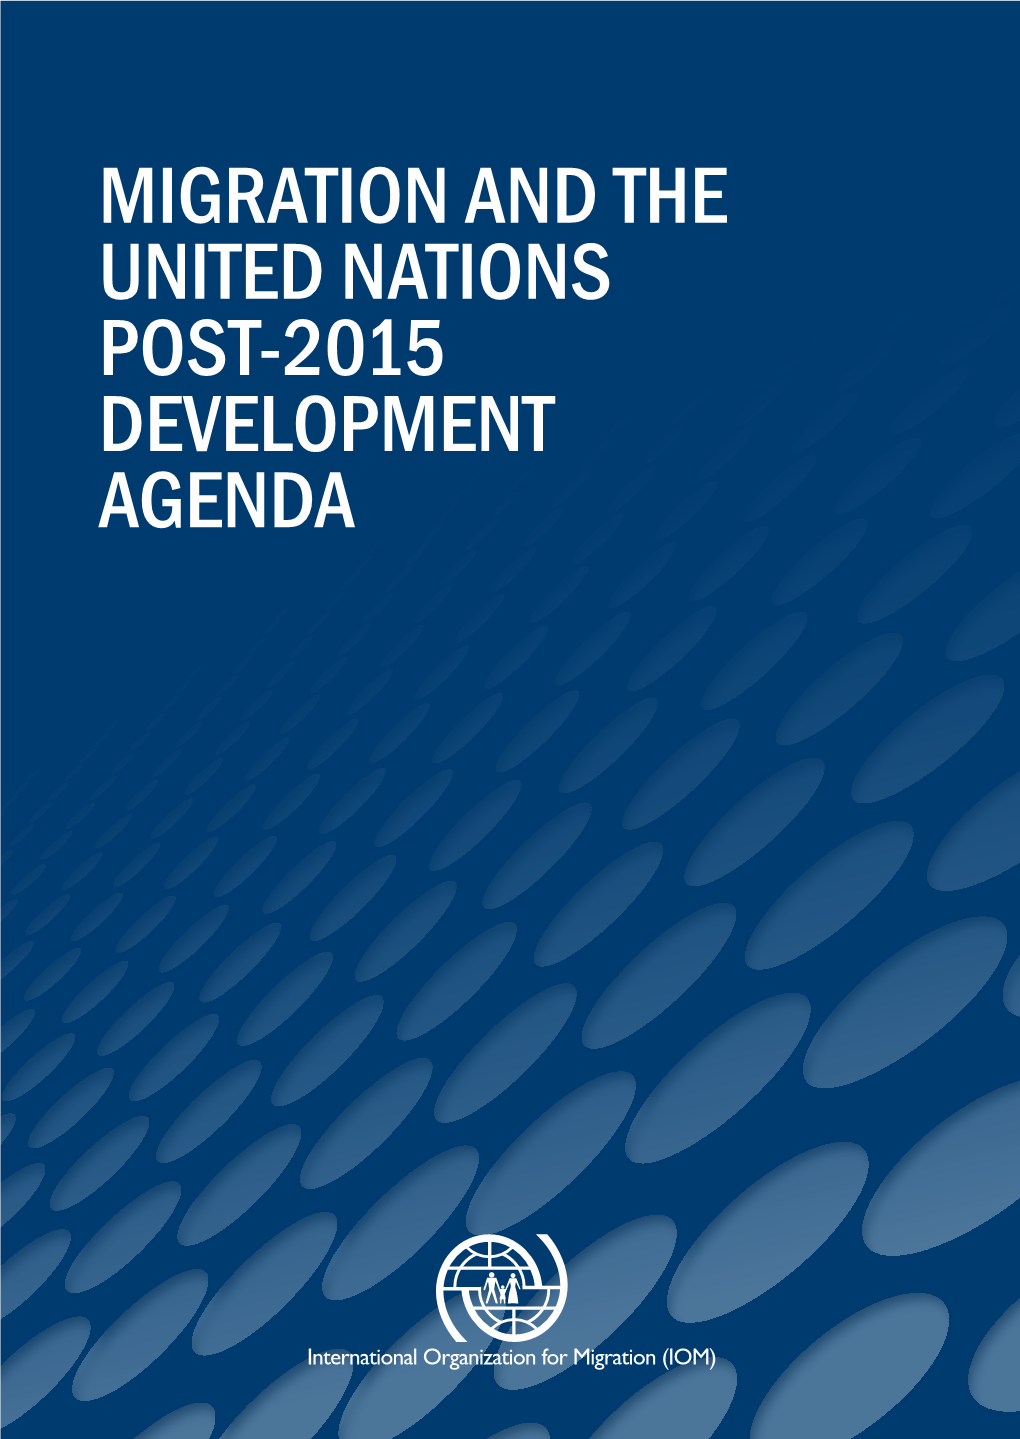 Migration and the United Nations Post-2015 Development